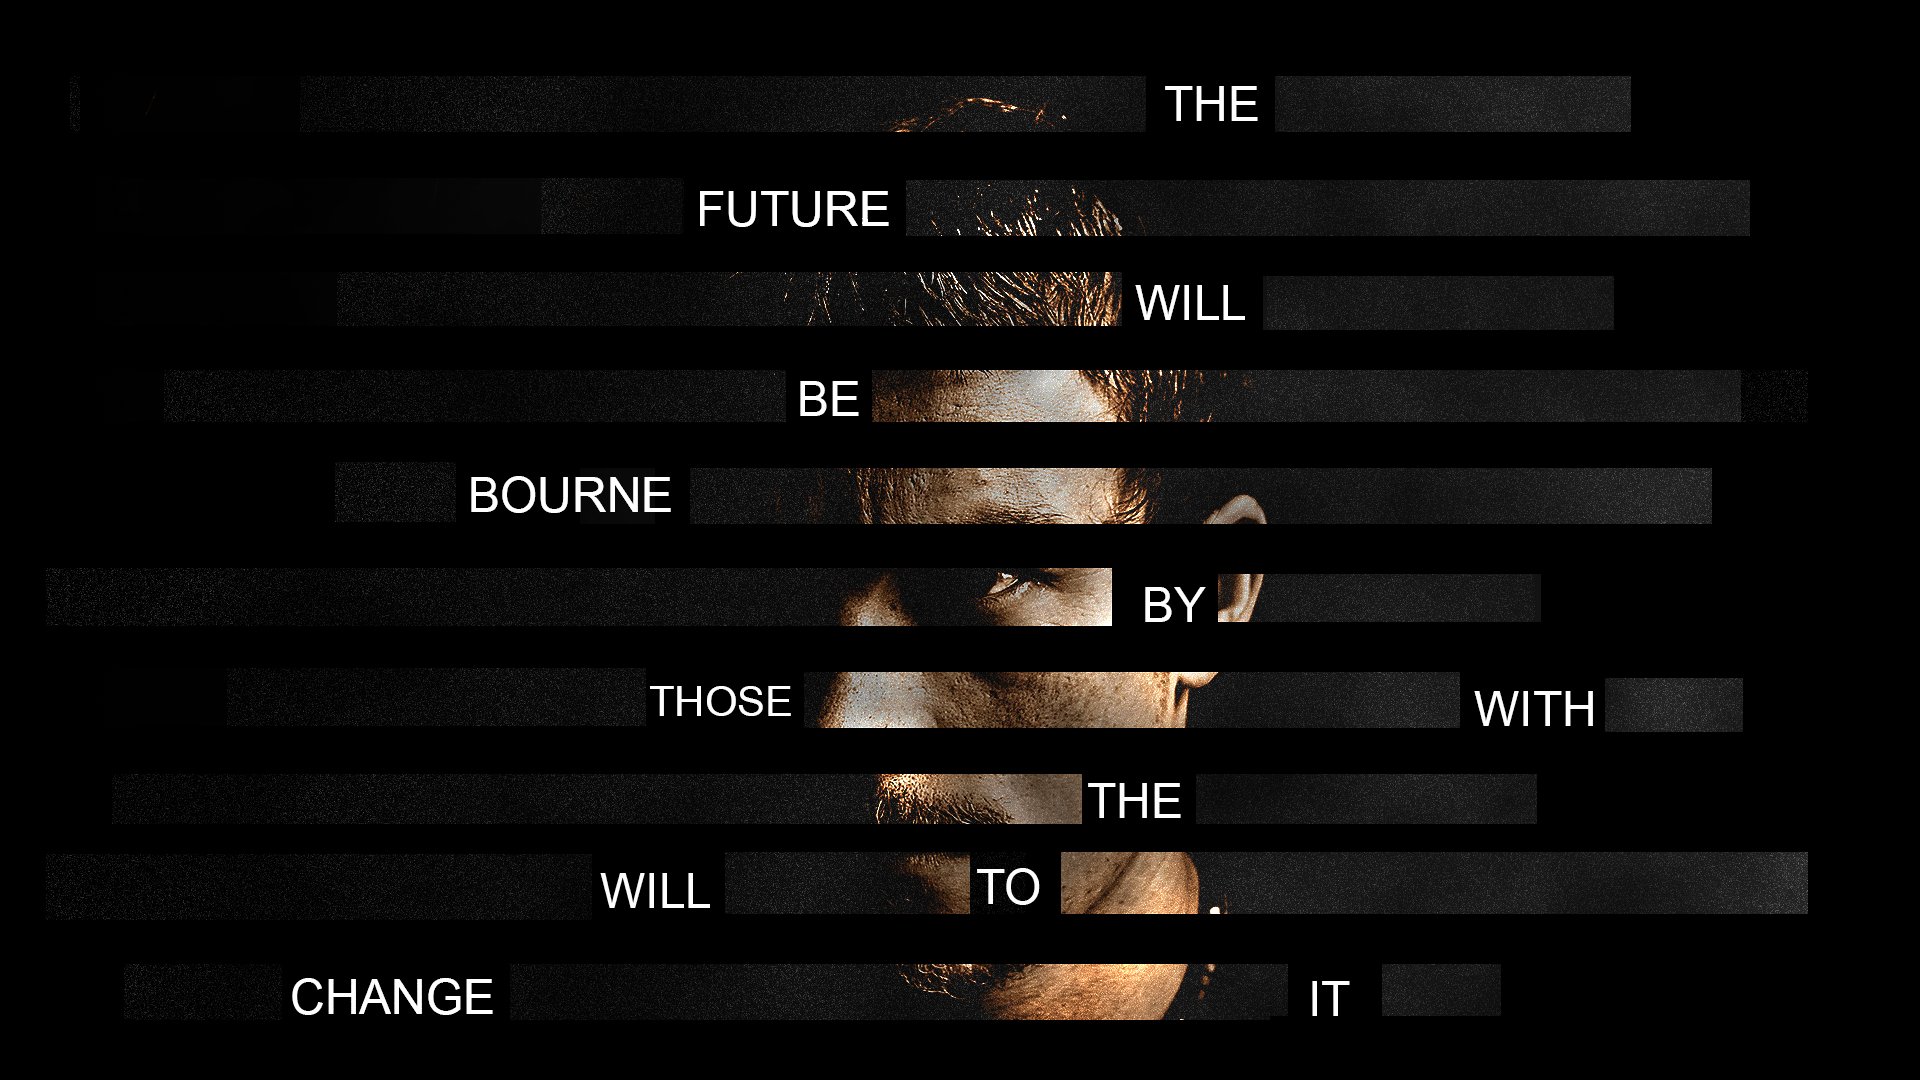 BOURNE LEGACY action mystery thriller spy hitman poster wallpapers